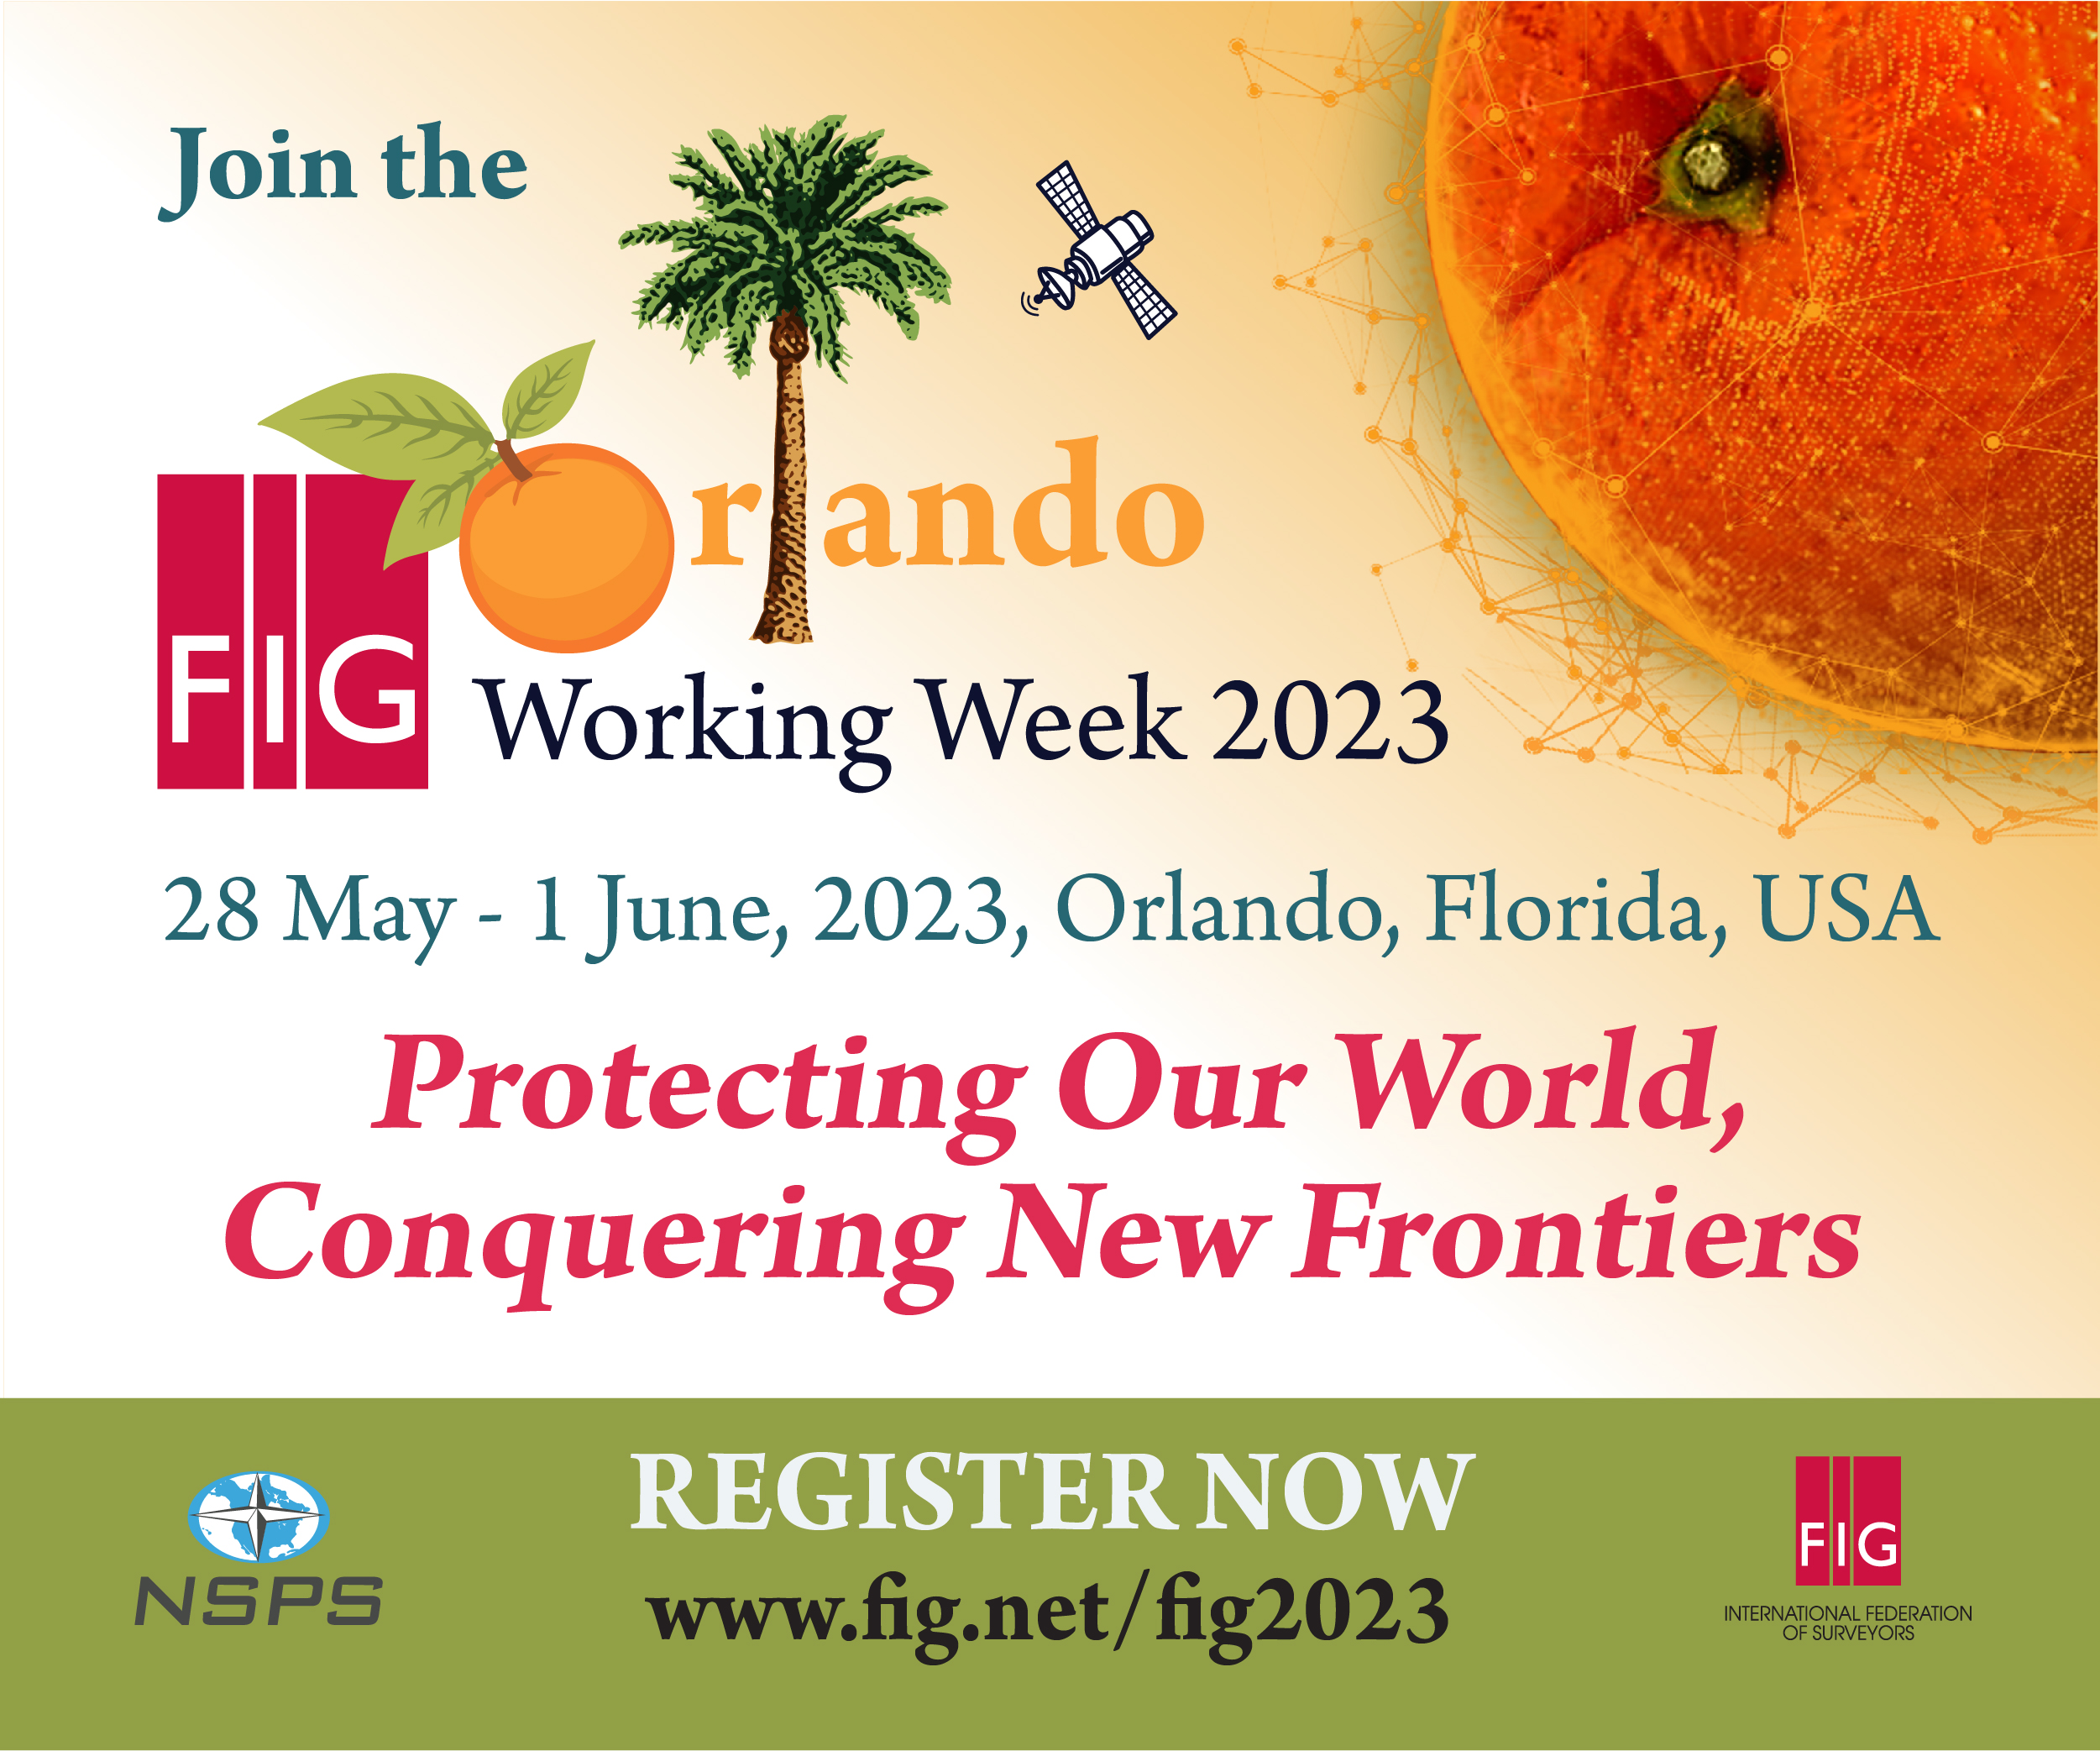 Preparations for the FIG Working Week 2023 in Orlando